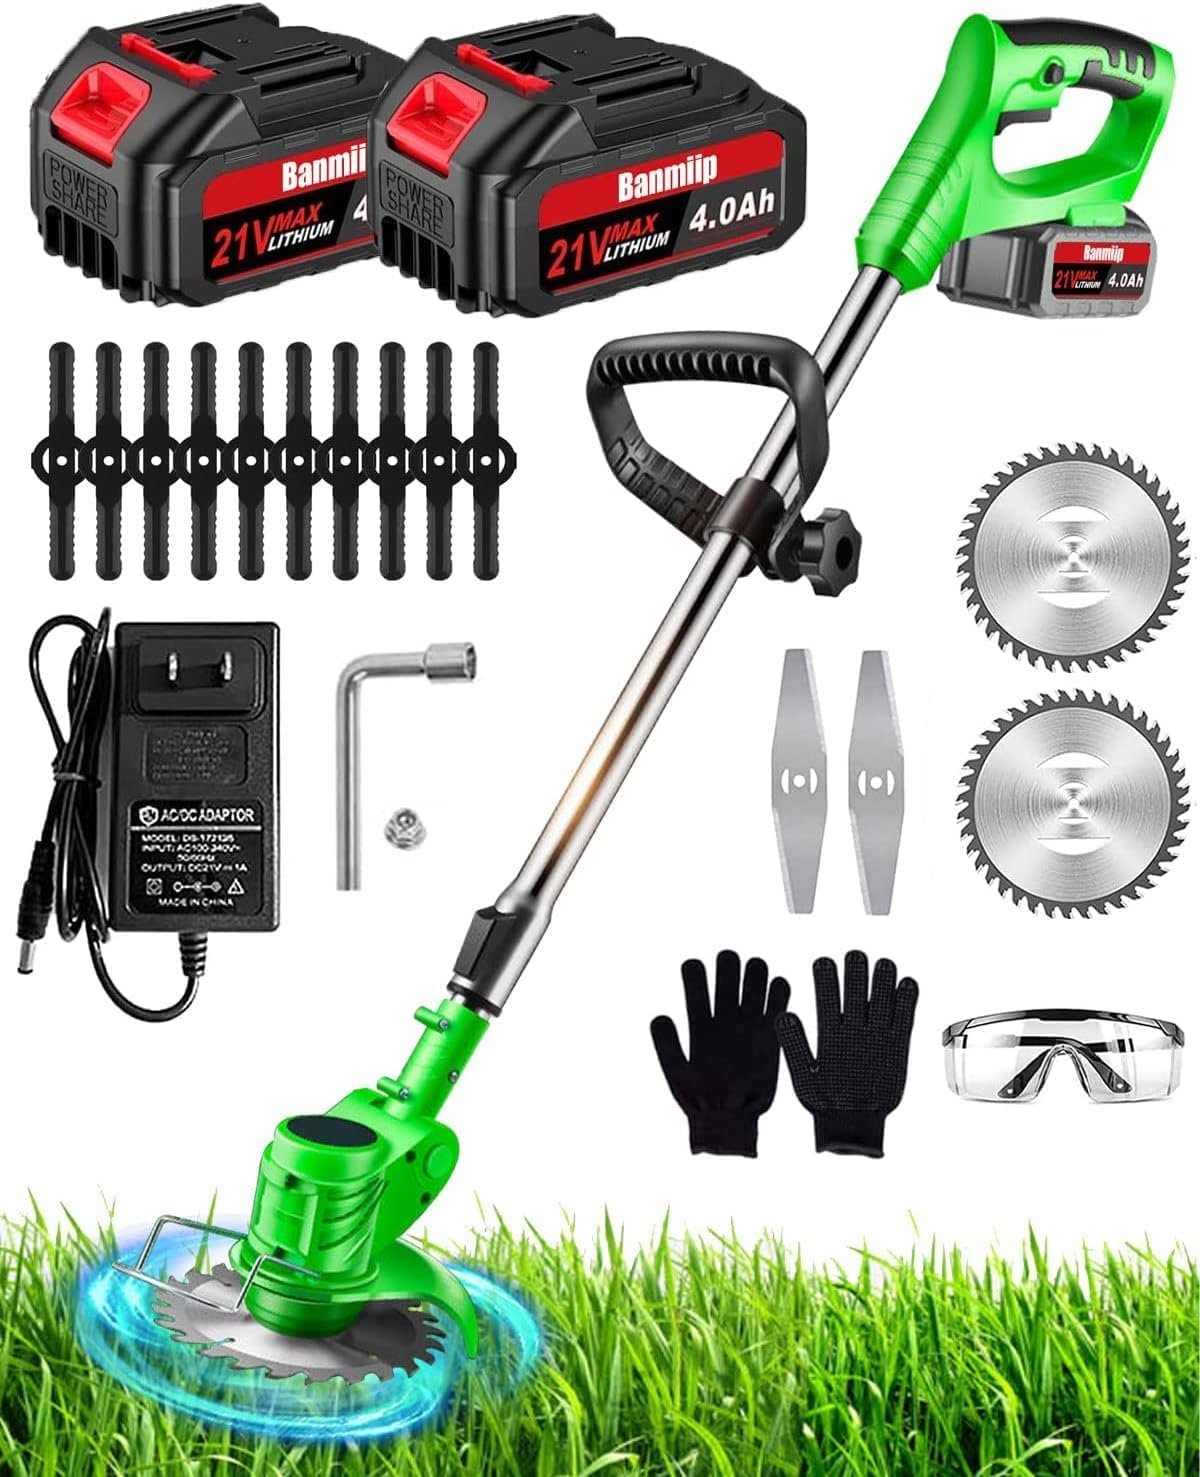 Weed Wacker Battery Powered Electric Weed Eater Review